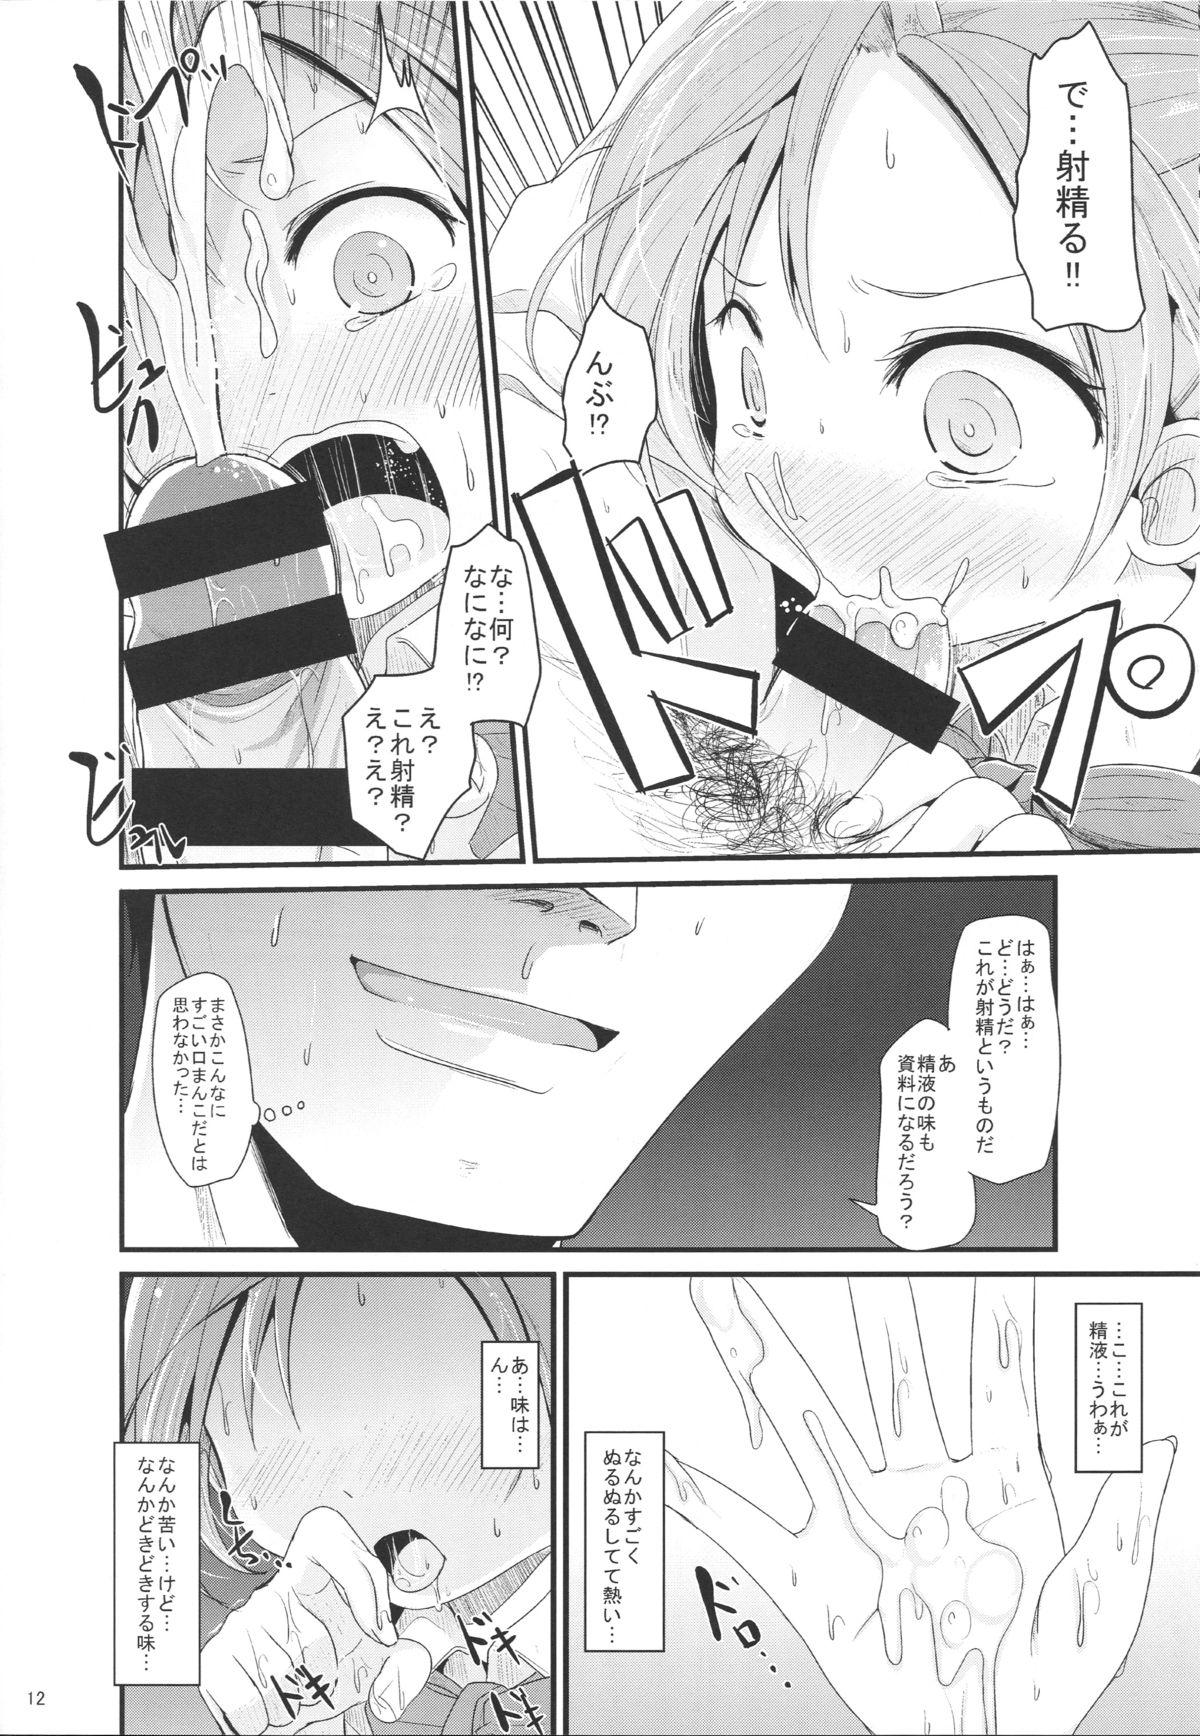 Dom Akigumo chance - Kantai collection White - Page 11